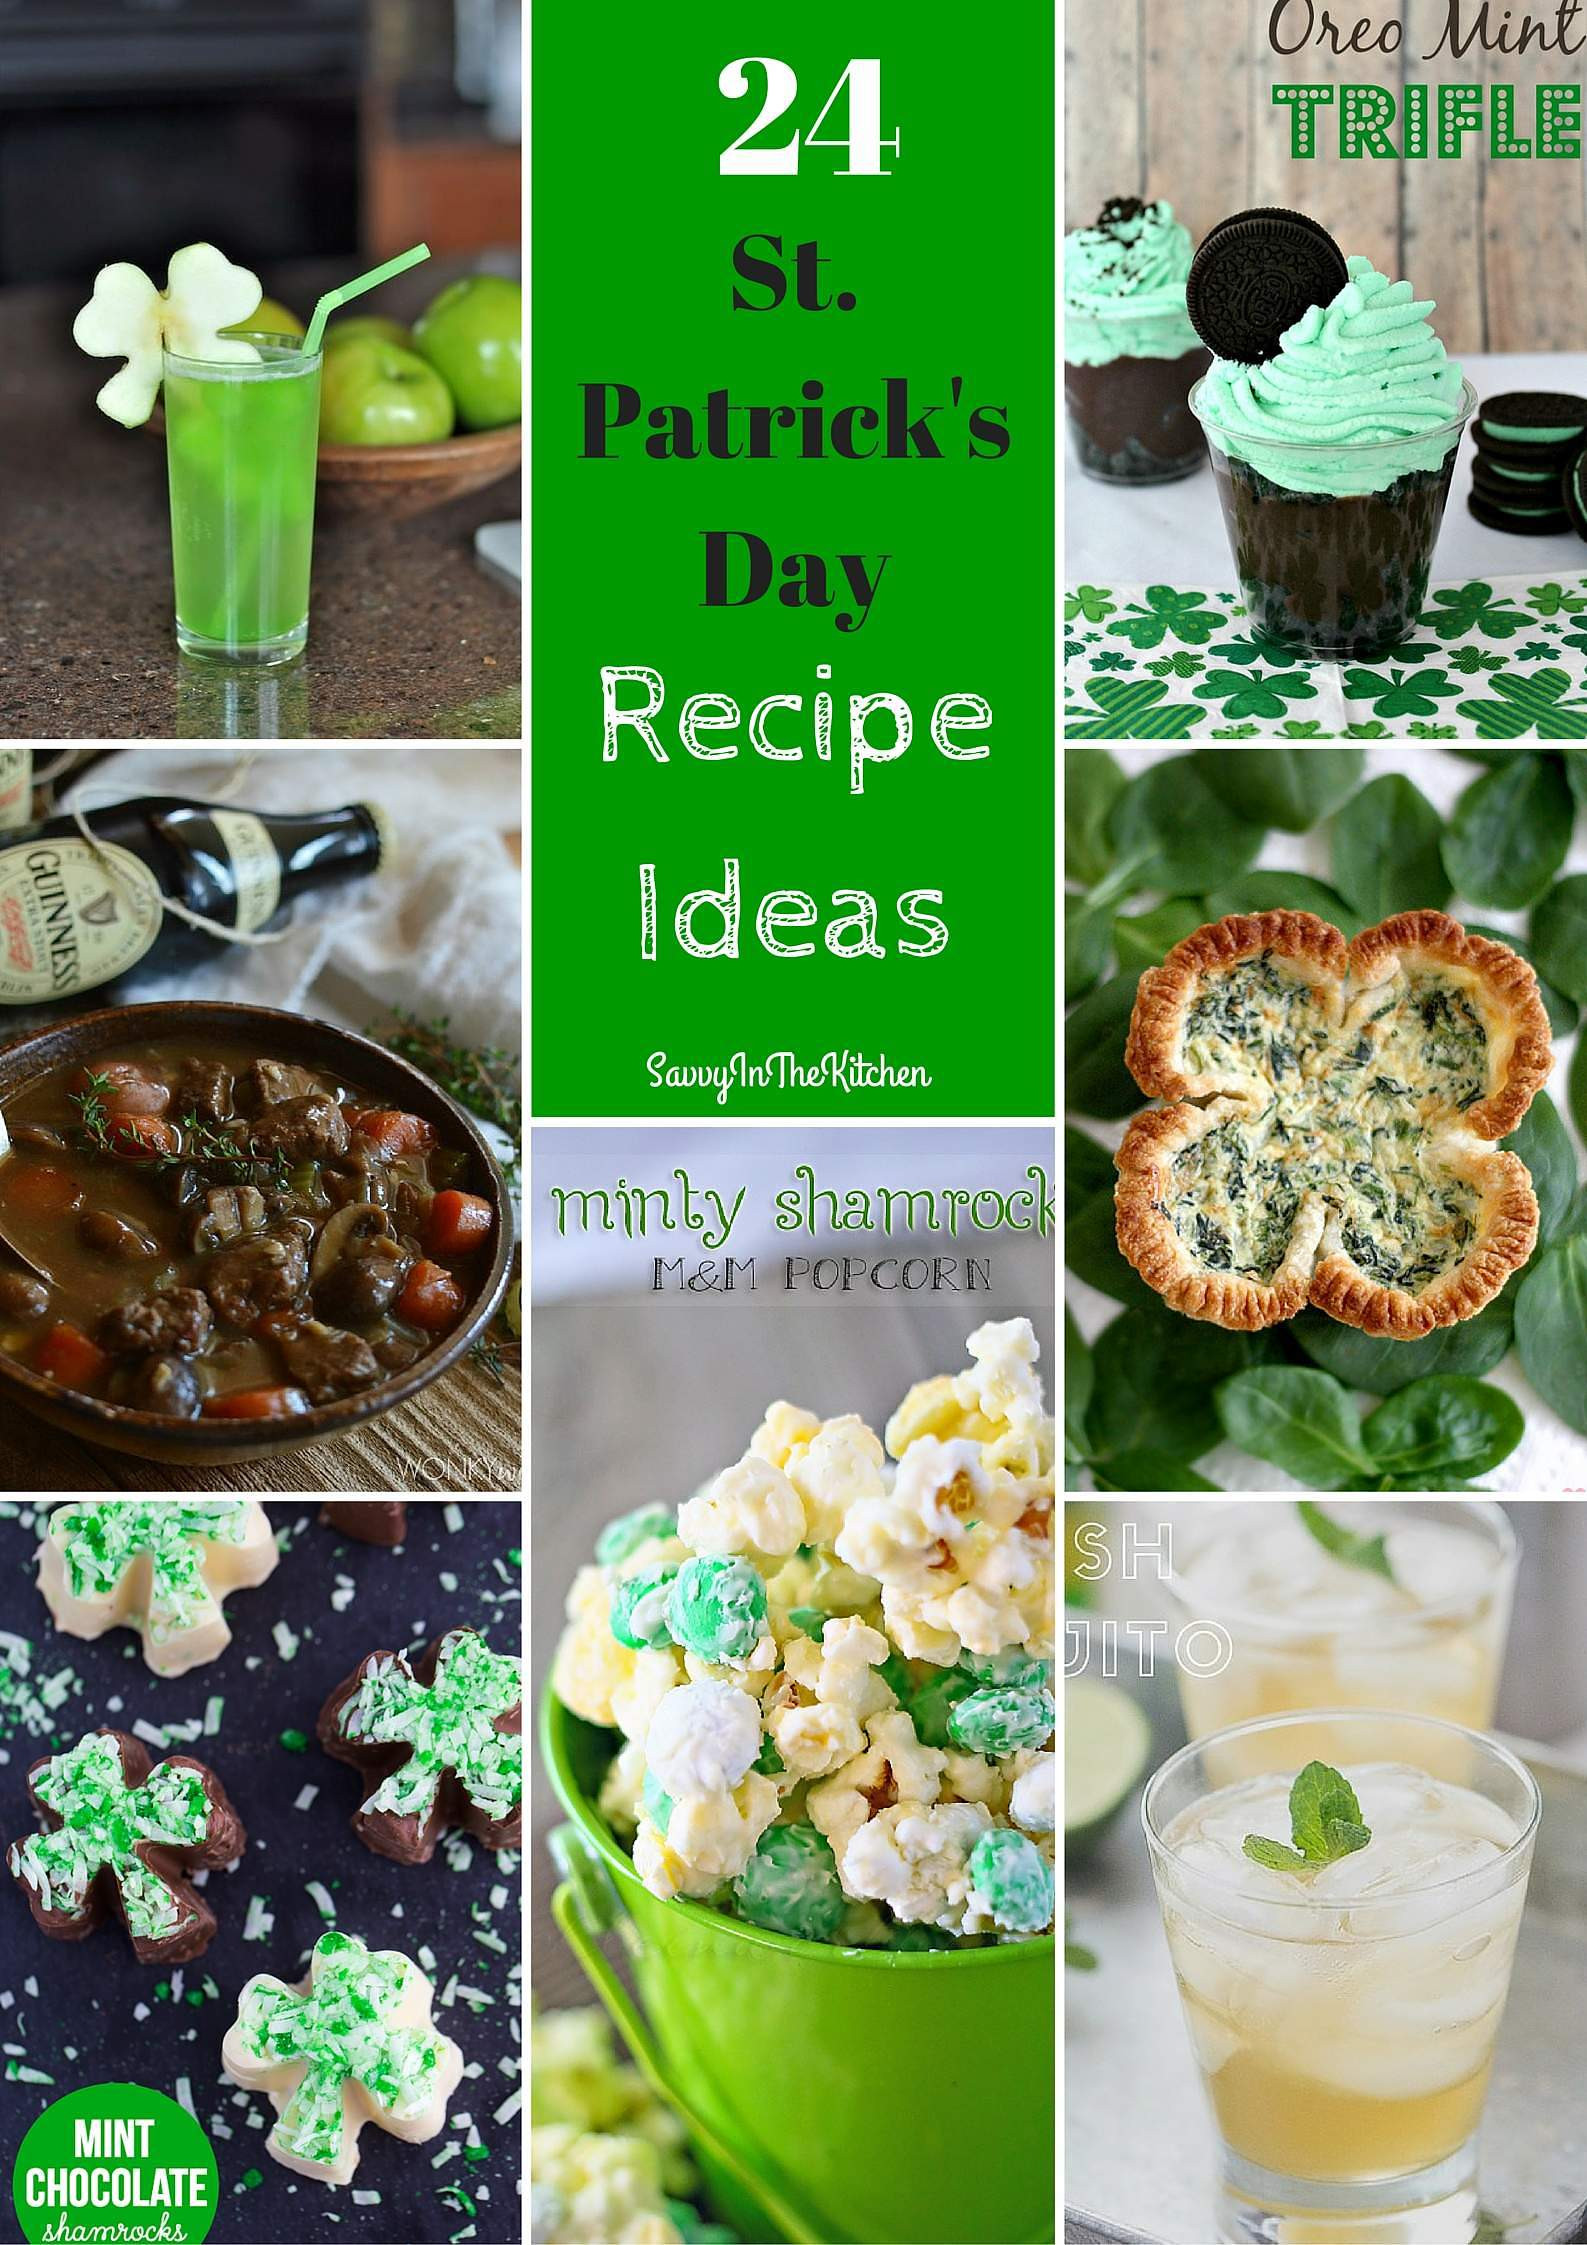 Saint Patrick's Day Food
 24 St Patrick s Day Recipe Ideas Savvy In The Kitchen